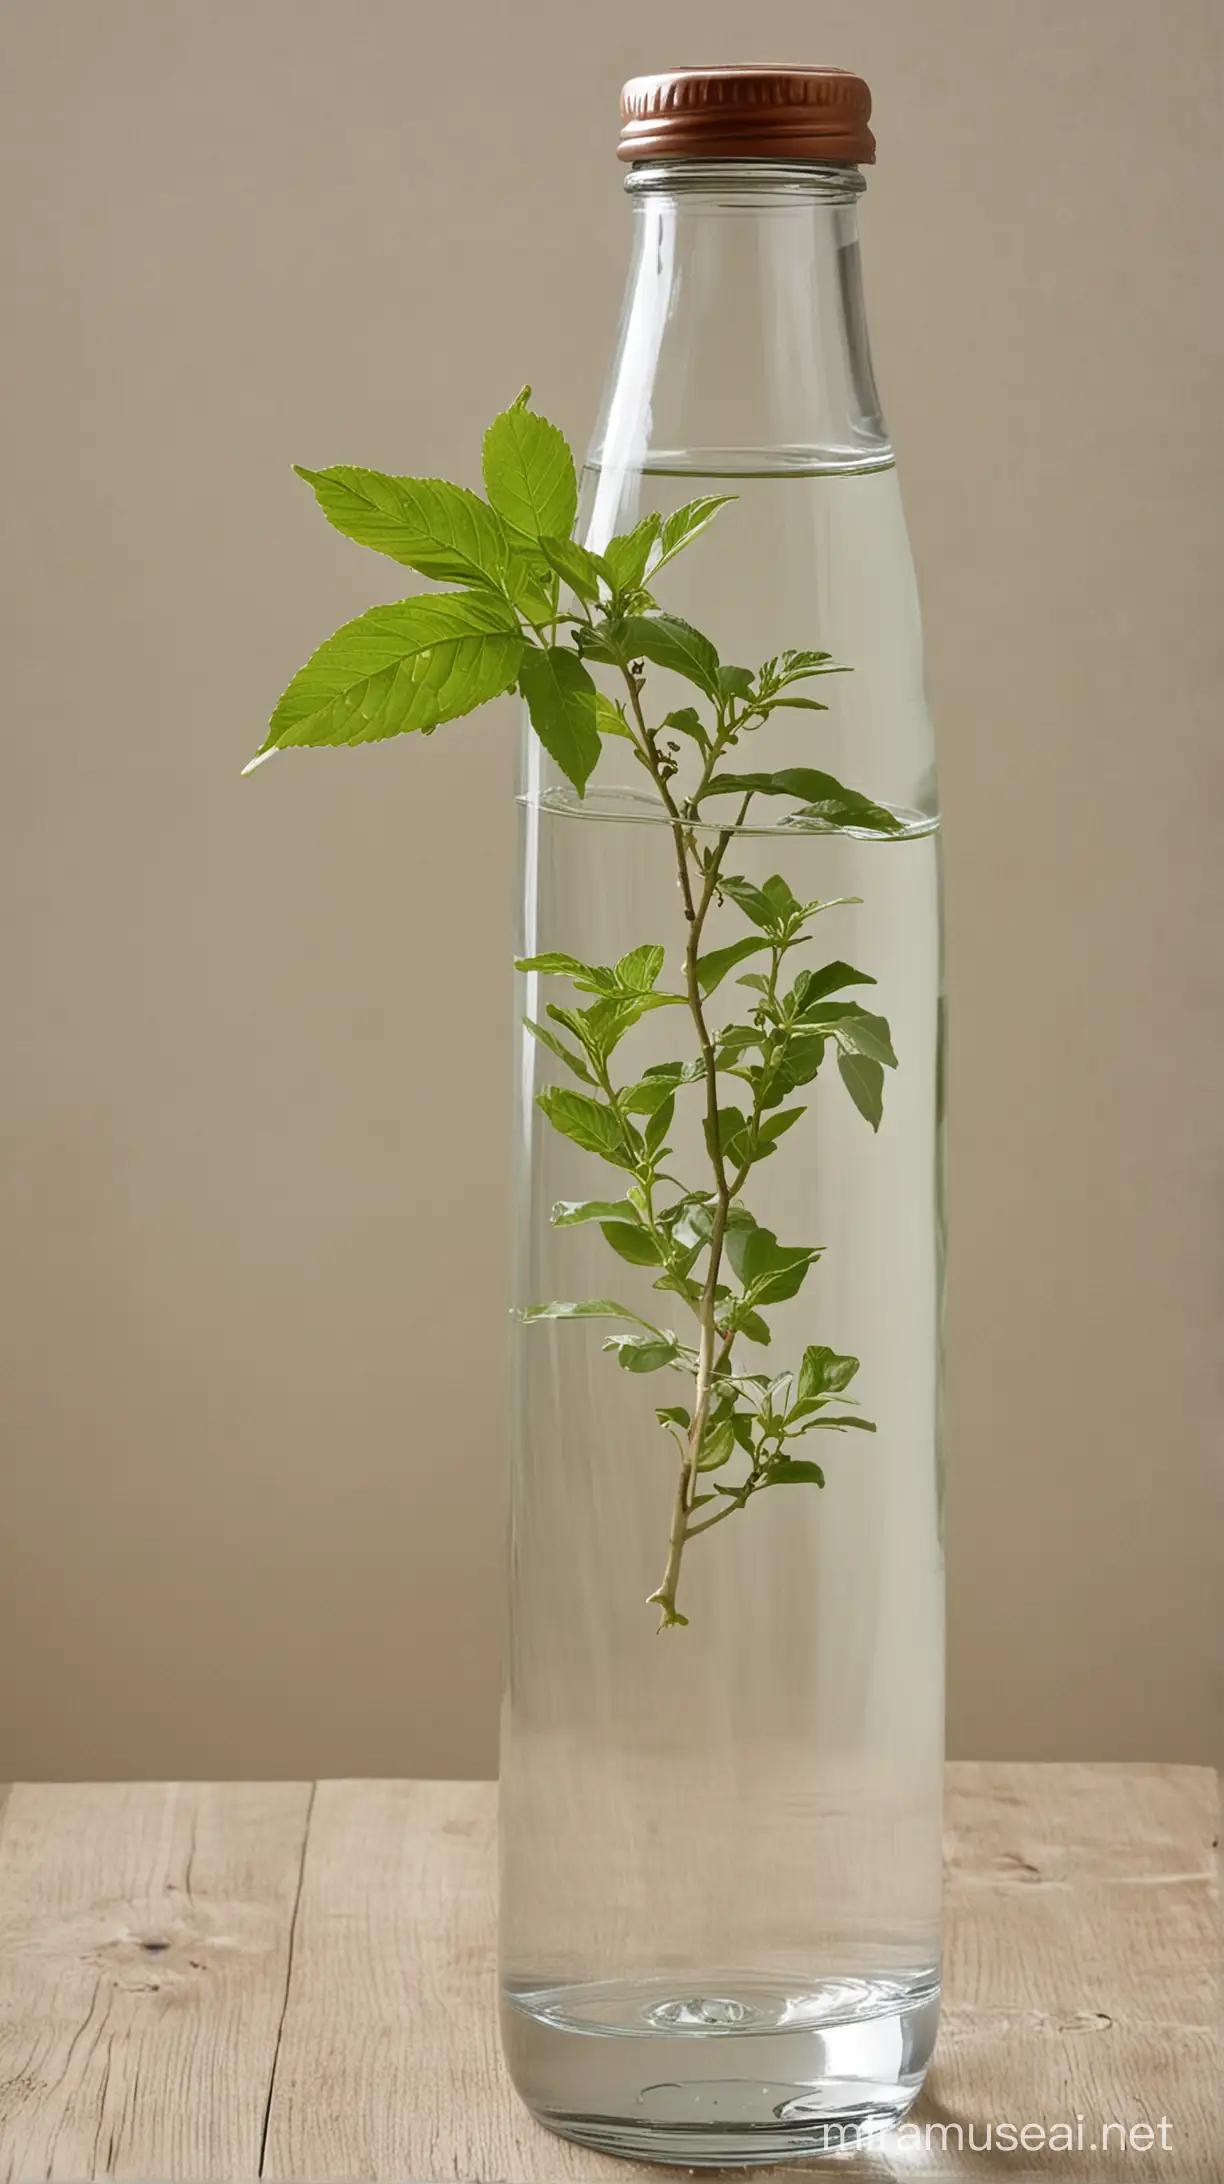 Refreshing Tulsi Infused Water with Mint Leaves